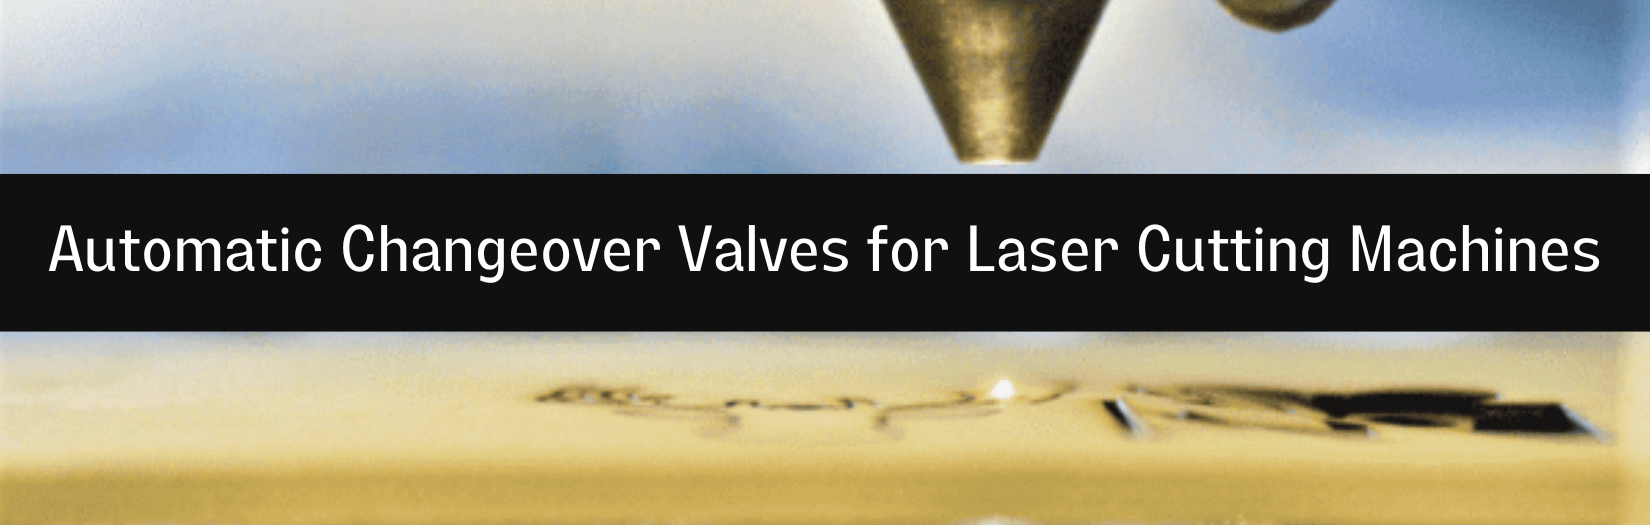 changeover valves for laser cutting